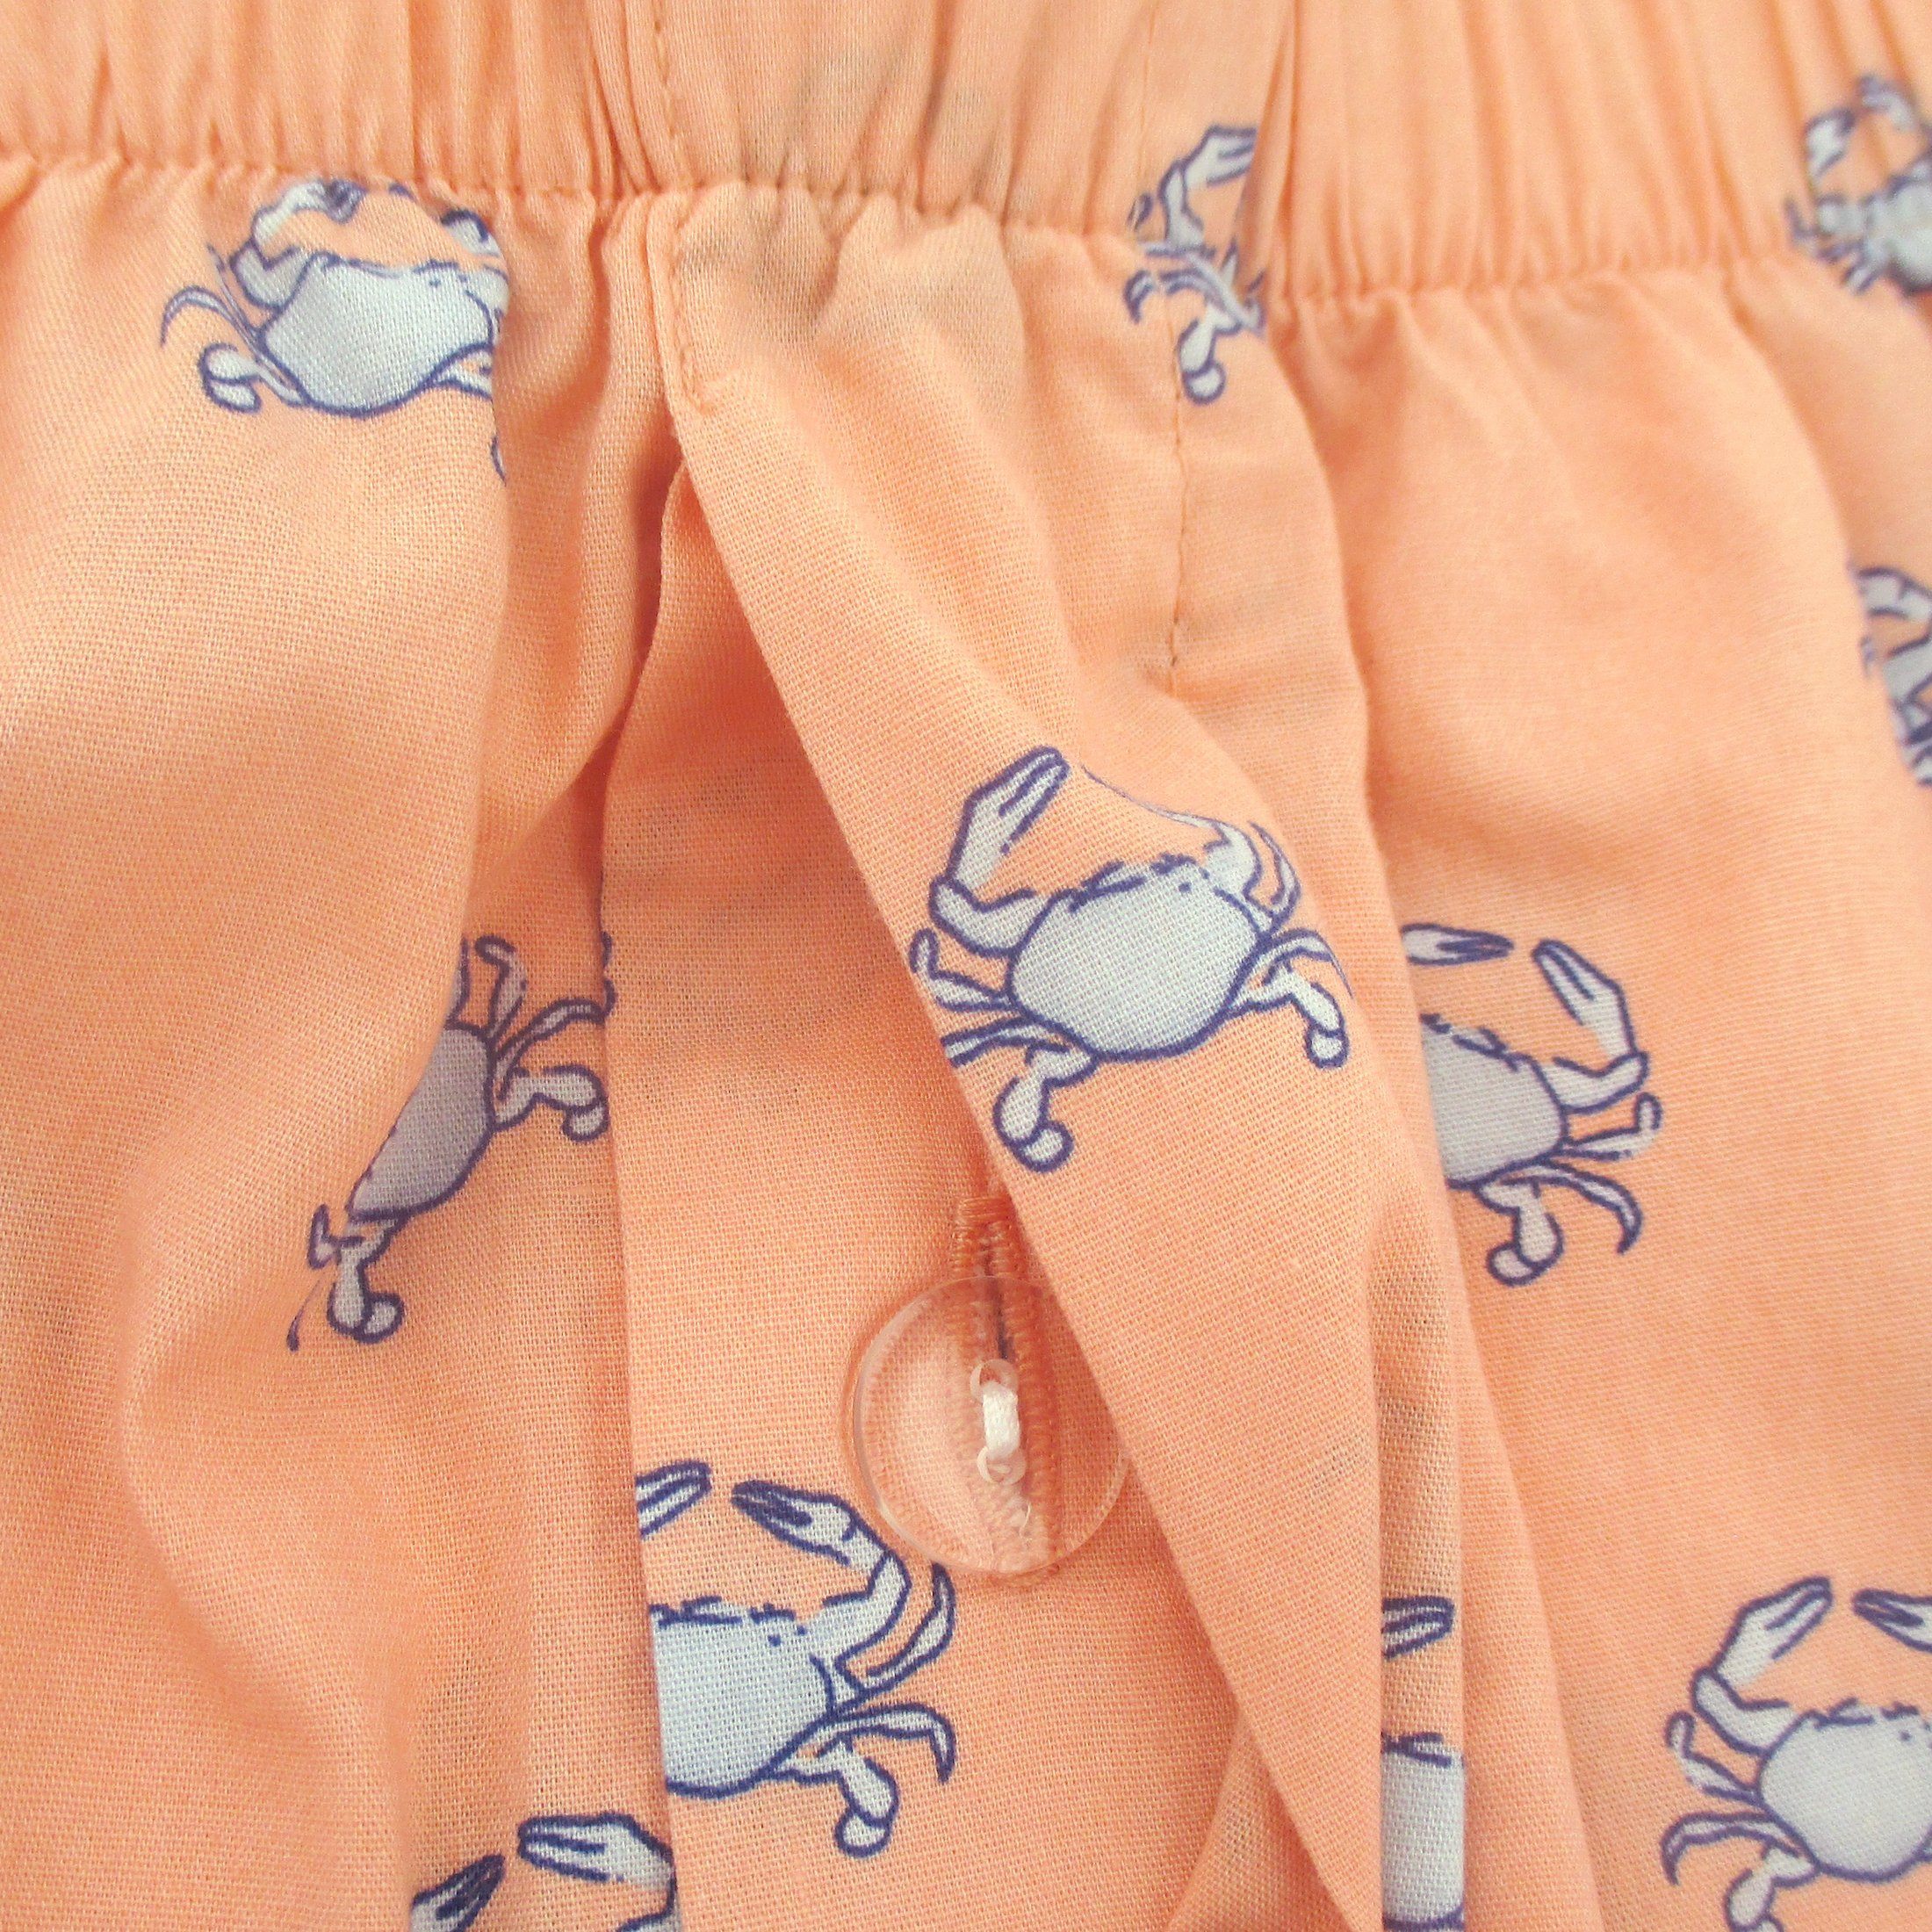 Boxer Shorts with Crabs All Over. Novelty Print Gag Gift Stocking Stuffers